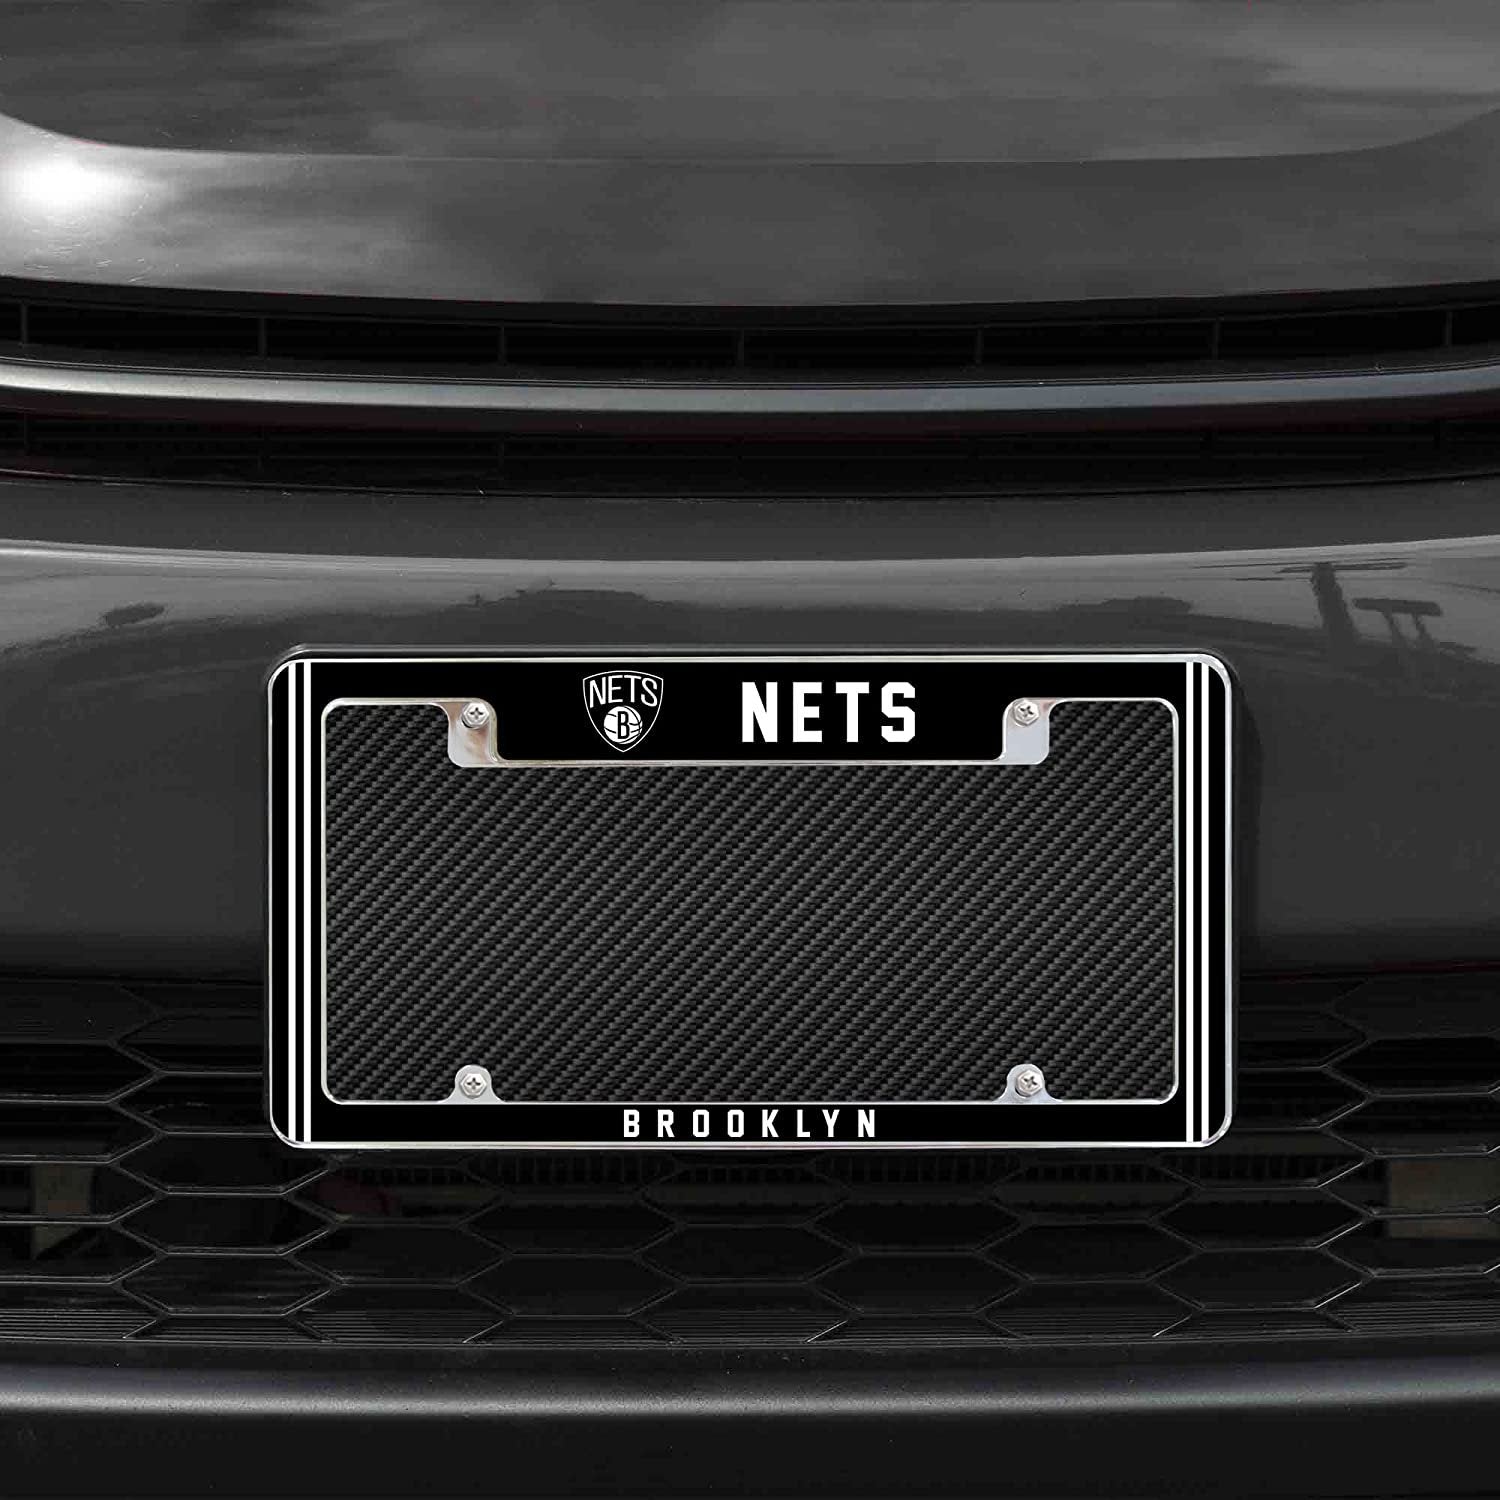 Brooklyn Nets Metal License Plate Frame Chrome Tag Cover Alternate Design 6x12 Inch